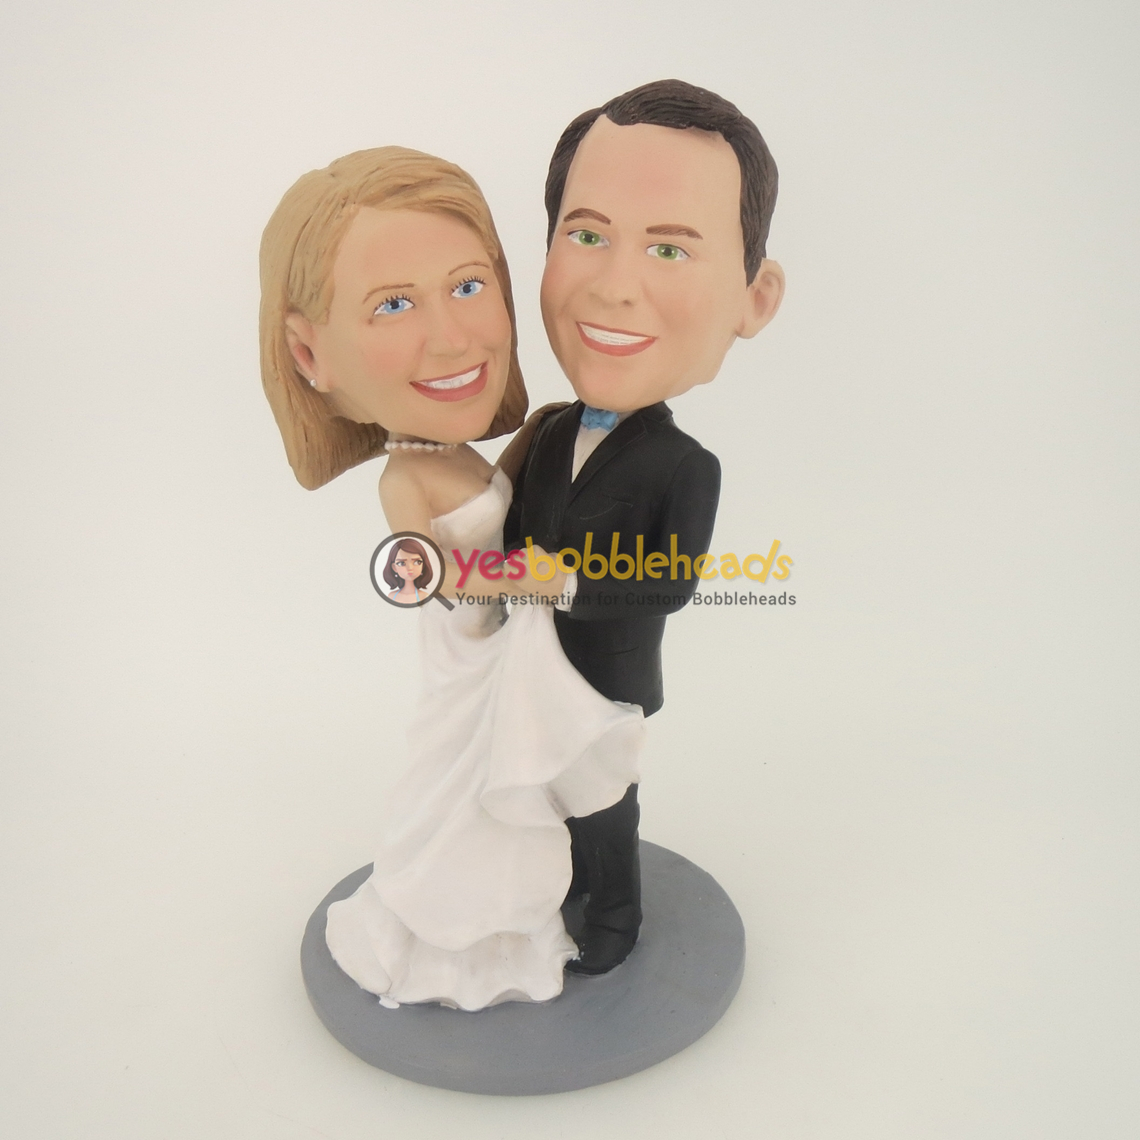 Picture of Custom Bobblehead Doll: Wedding Couple Holding Together